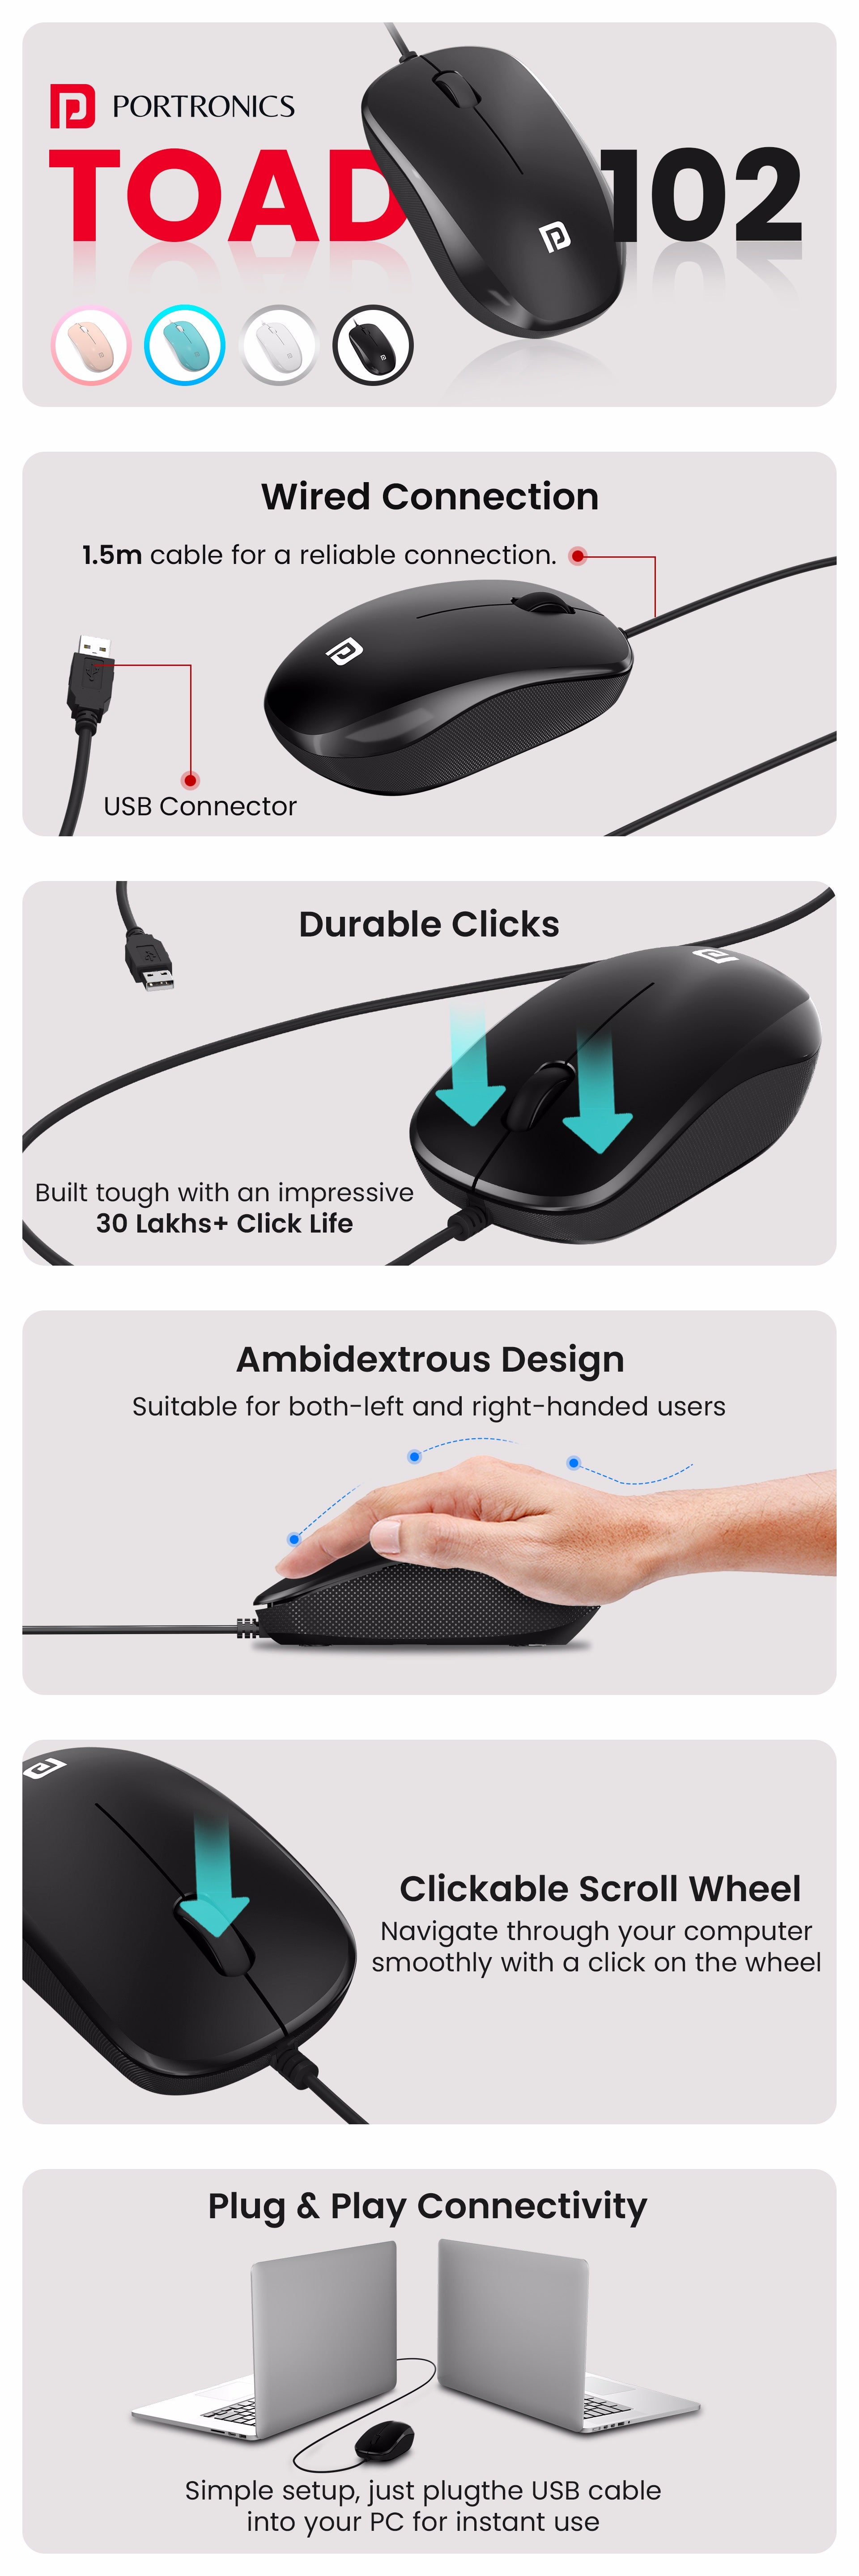 PortronicsToad 102 wired mouse with responsive 1600 DPI(Dot Per Inch) combing the best for working and photo editing.